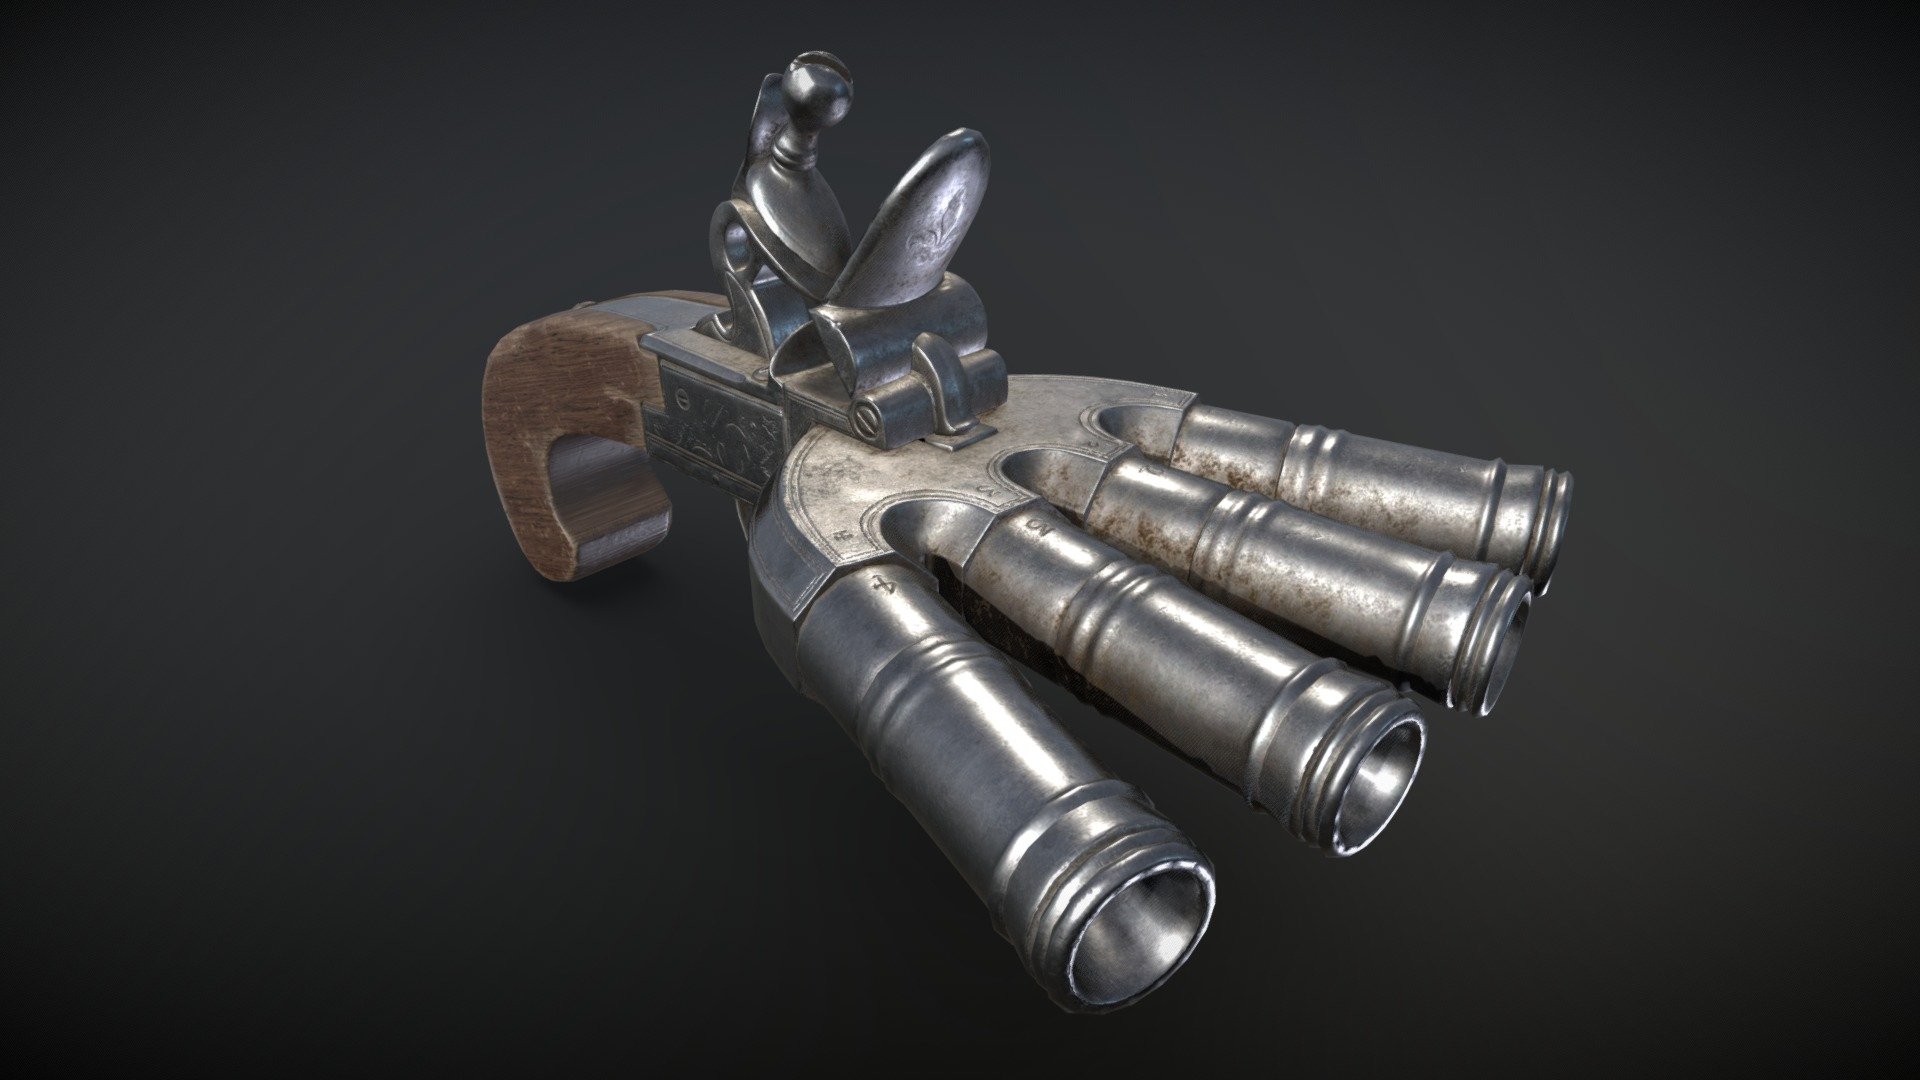 Duck Foot Pistol&hellip;  When you absolutely, positively got to kill every mutineer on the ship deck.

These &ldquo;duck foot